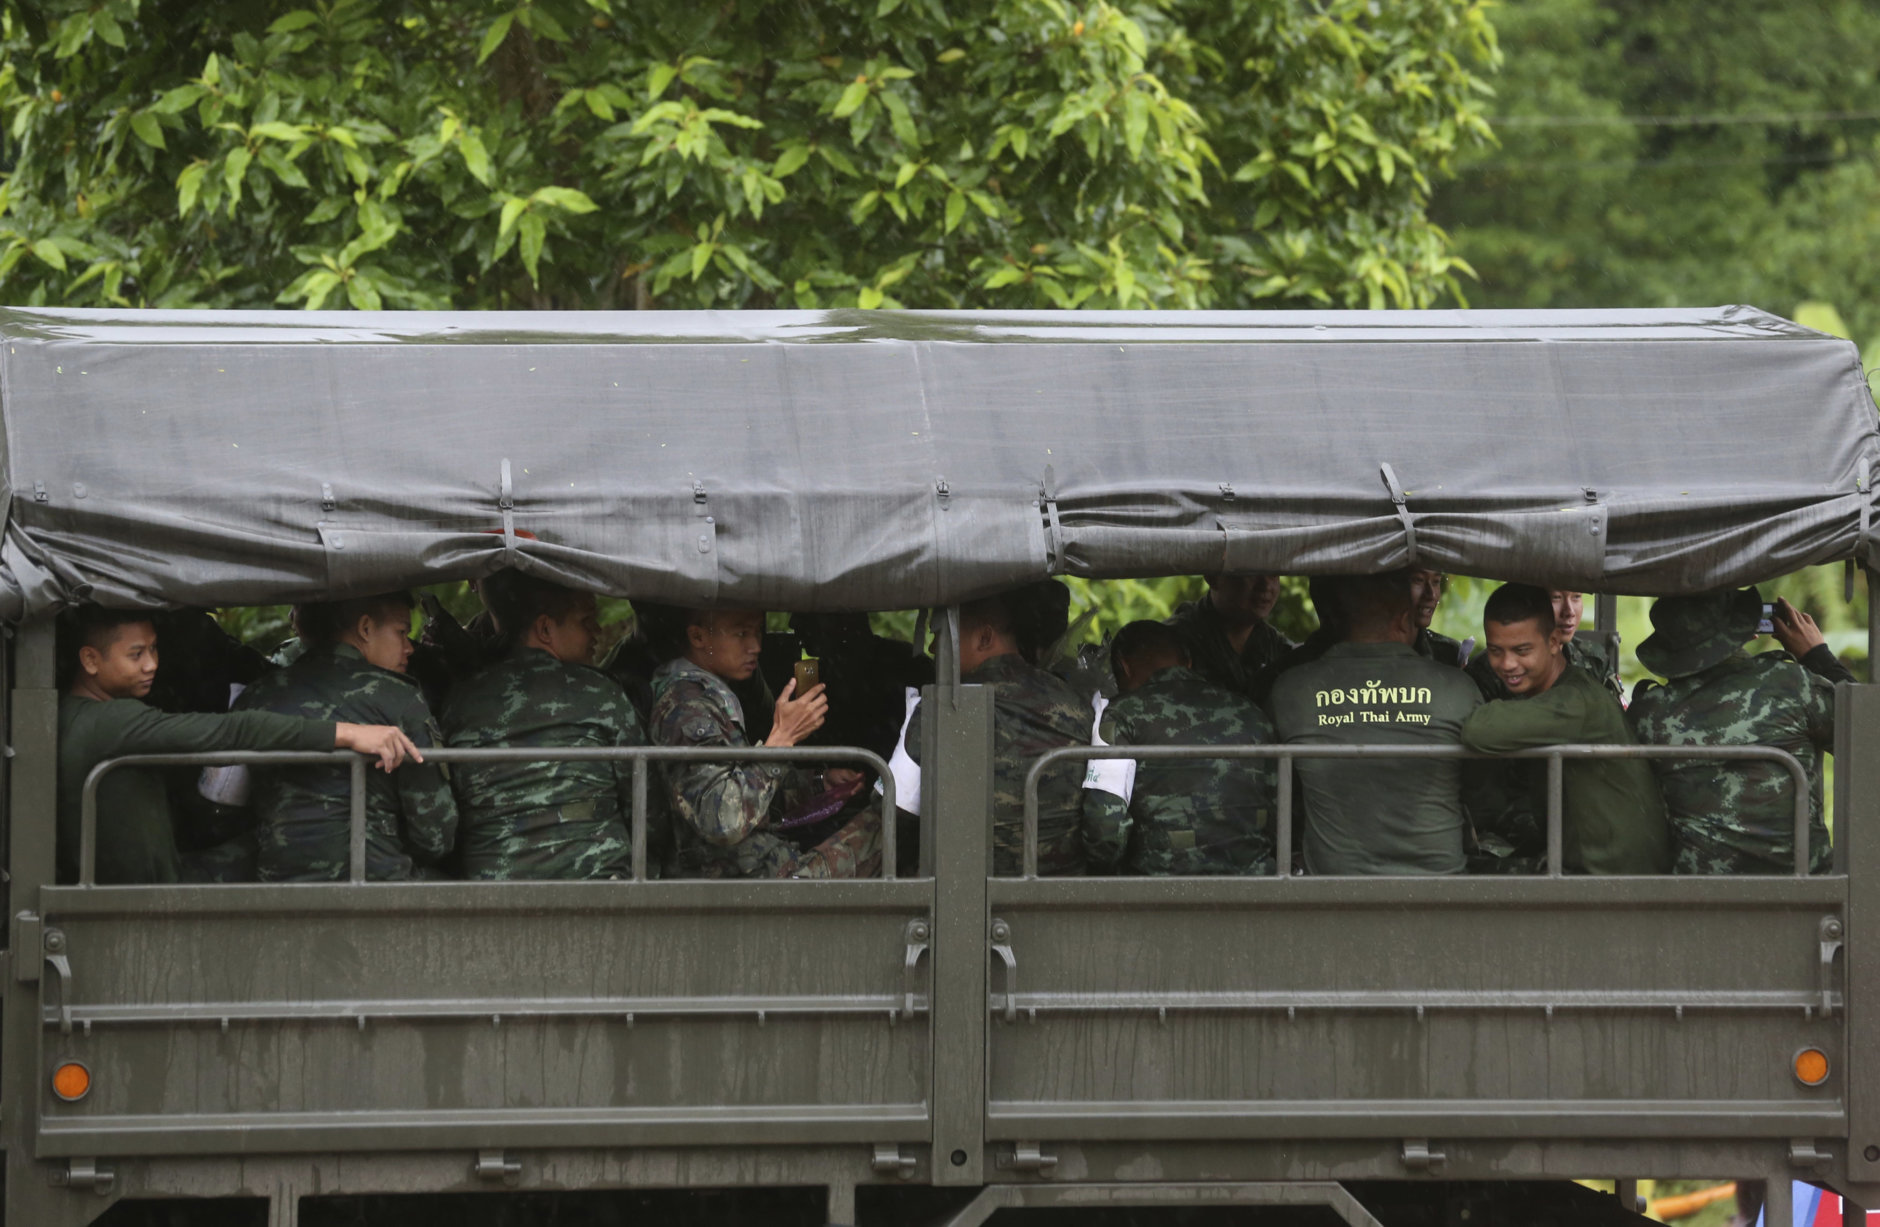 Thai soldiers leave a cave rescue area in Mae Sai, Chiang Rai province, northern Thailand, Wednesday, July 11, 2018. A daring rescue mission in the treacherous confines of a flooded cave in northern Thailand has saved all 12 boys and their soccer coach who were trapped deep within the labyrinth, ending a grueling 18-day ordeal that claimed the life of an experienced volunteer diver and riveted people around the world. (AP Photo/Sakchai Lalit)